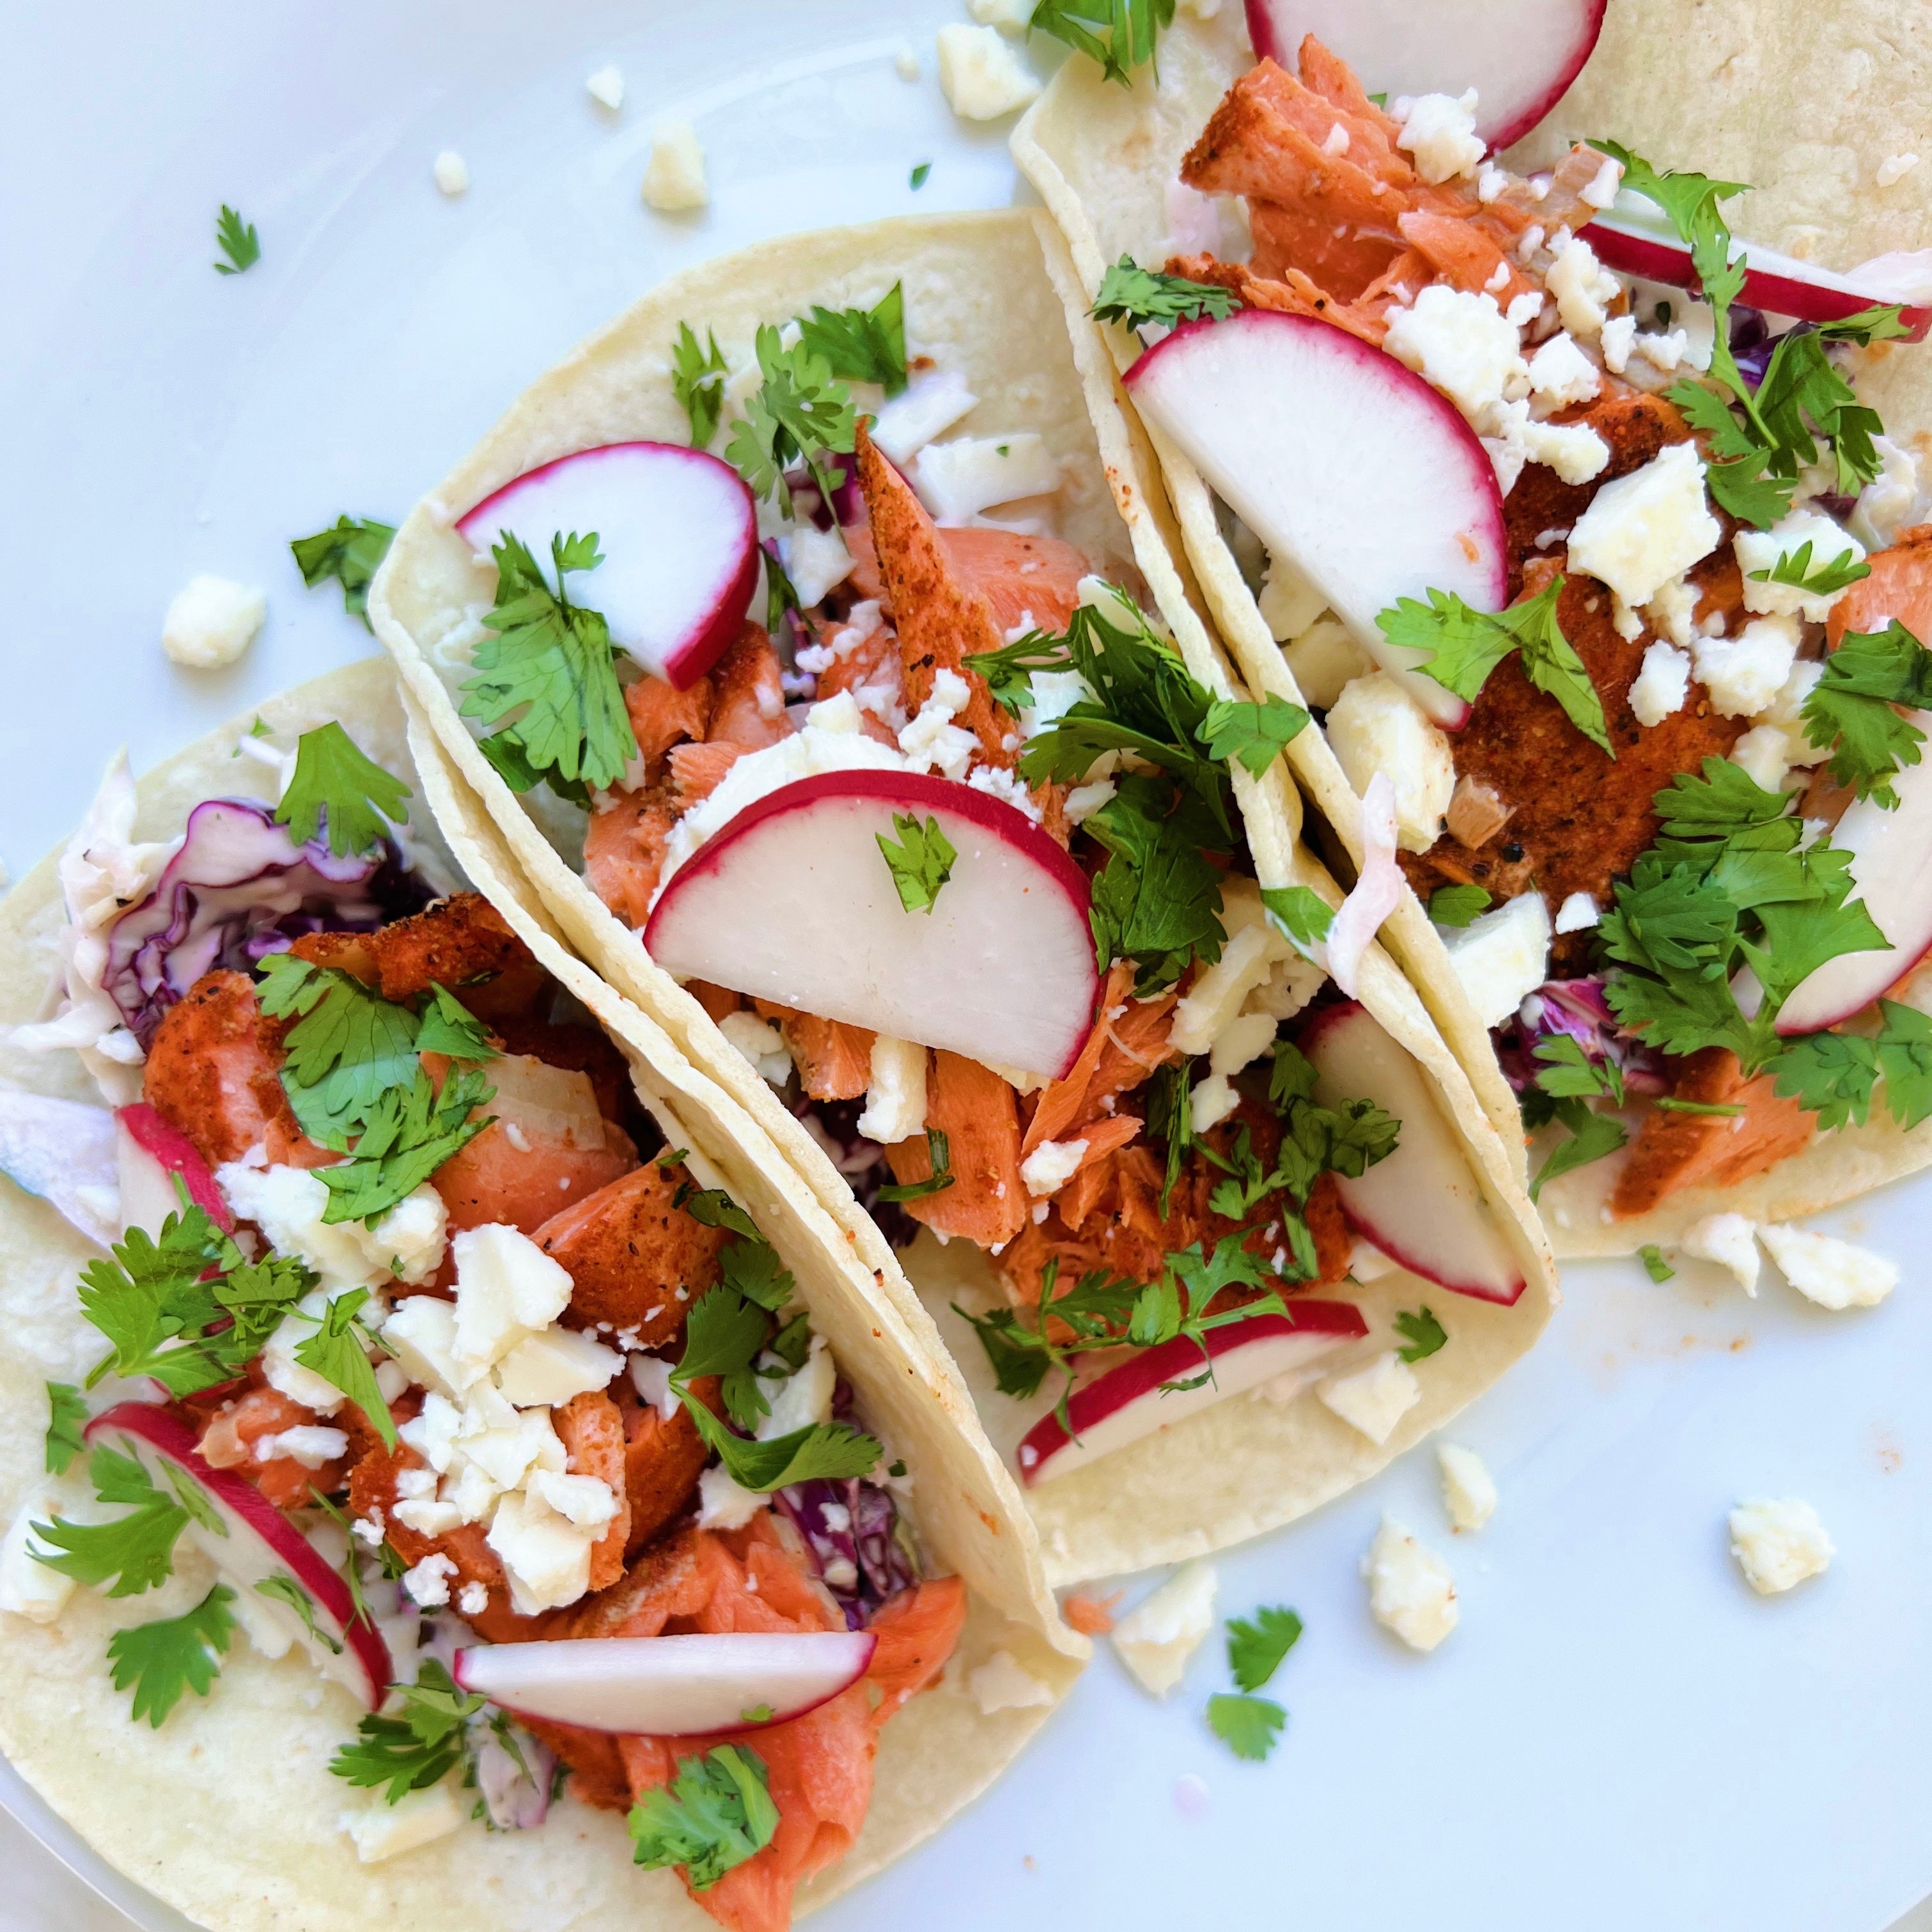 A Taste of Mexico: 10 Mexican-Inspired Seafood Recipes for Cinco De Mayo!